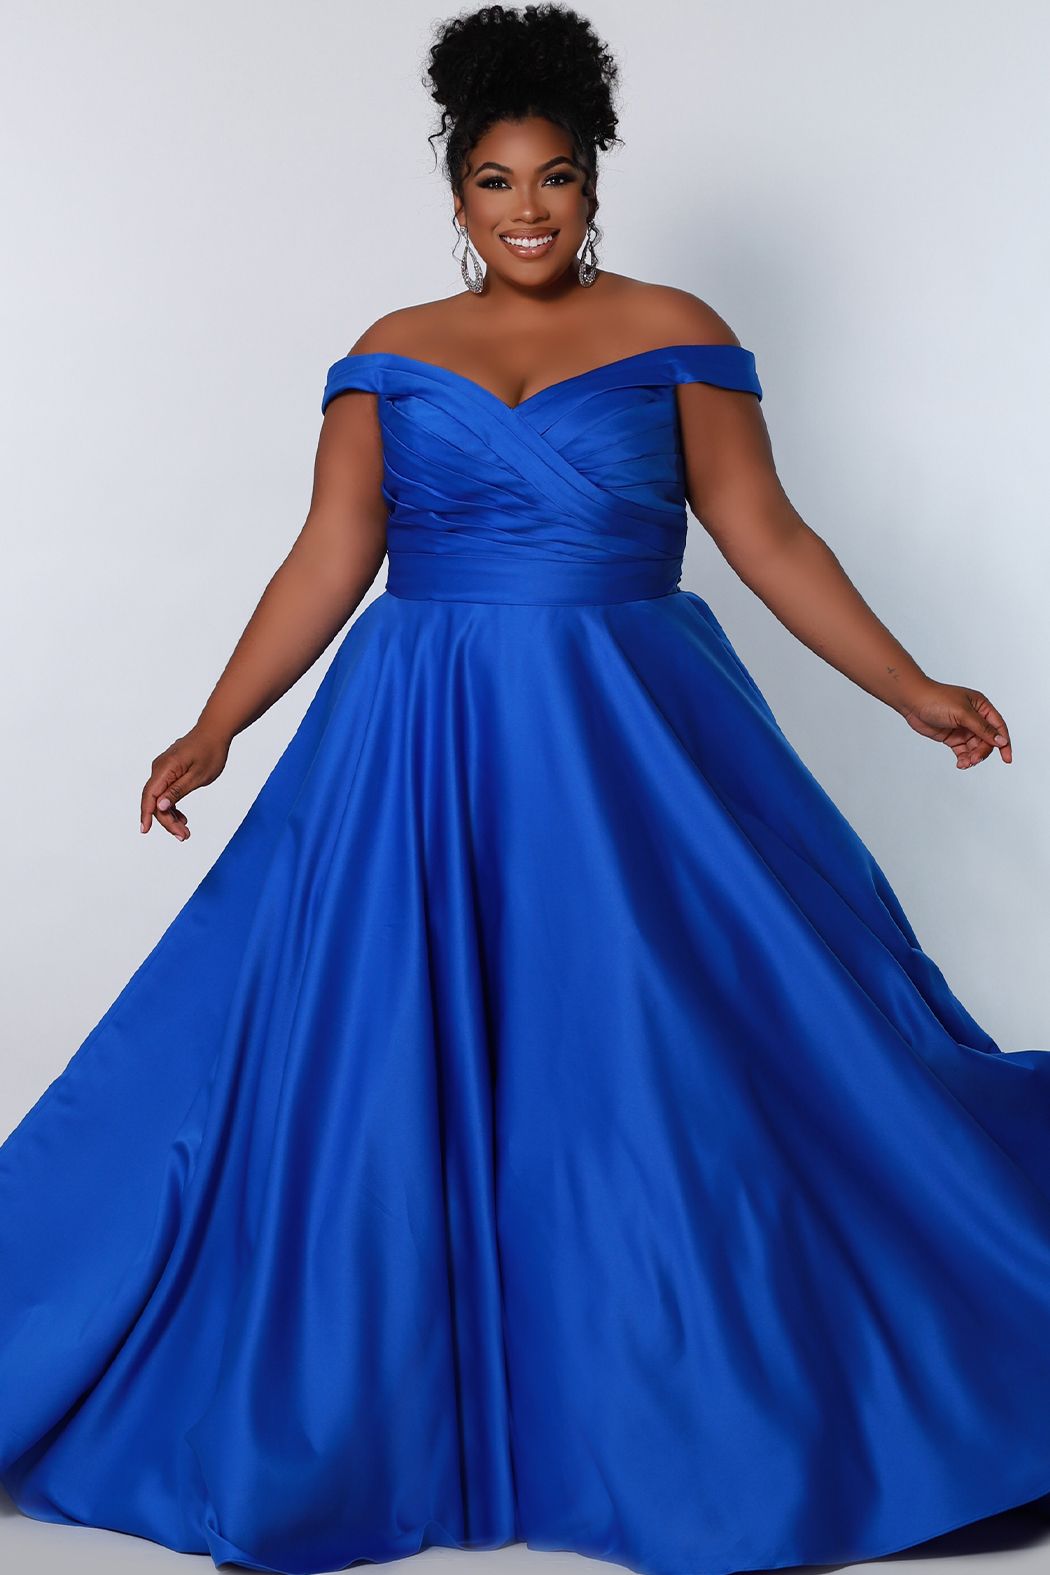 Sydney's Closet SC7321 This is an a line plus size prom dress with a pleated bodice and a v-neckline and v-back. Off-the-shoulder straps accompany elastic bands for full dancing ability! The full crinoline a line skirt flatters your natural waistline, and is made complete with a party must-have, pockets.